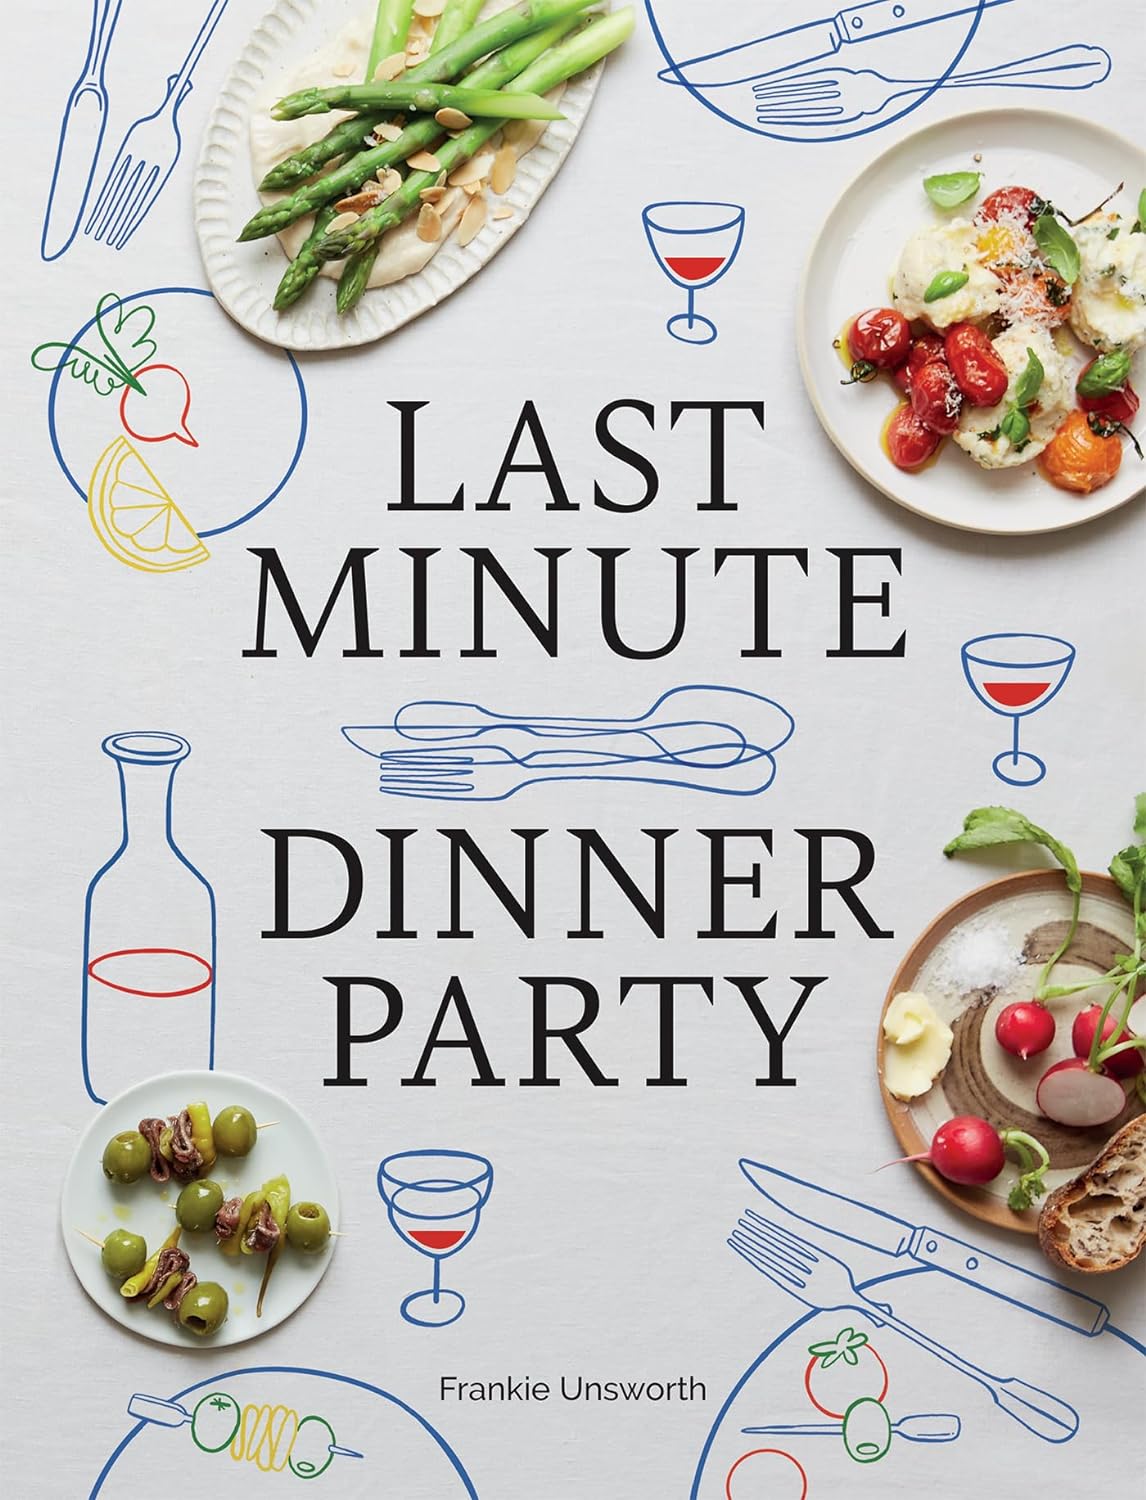 *Pre-order* Last Minute Dinner Party: Over 120 Inspiring Dishes to Feed Family and Friends At A Moment's Notice (Frankie Unsworth)